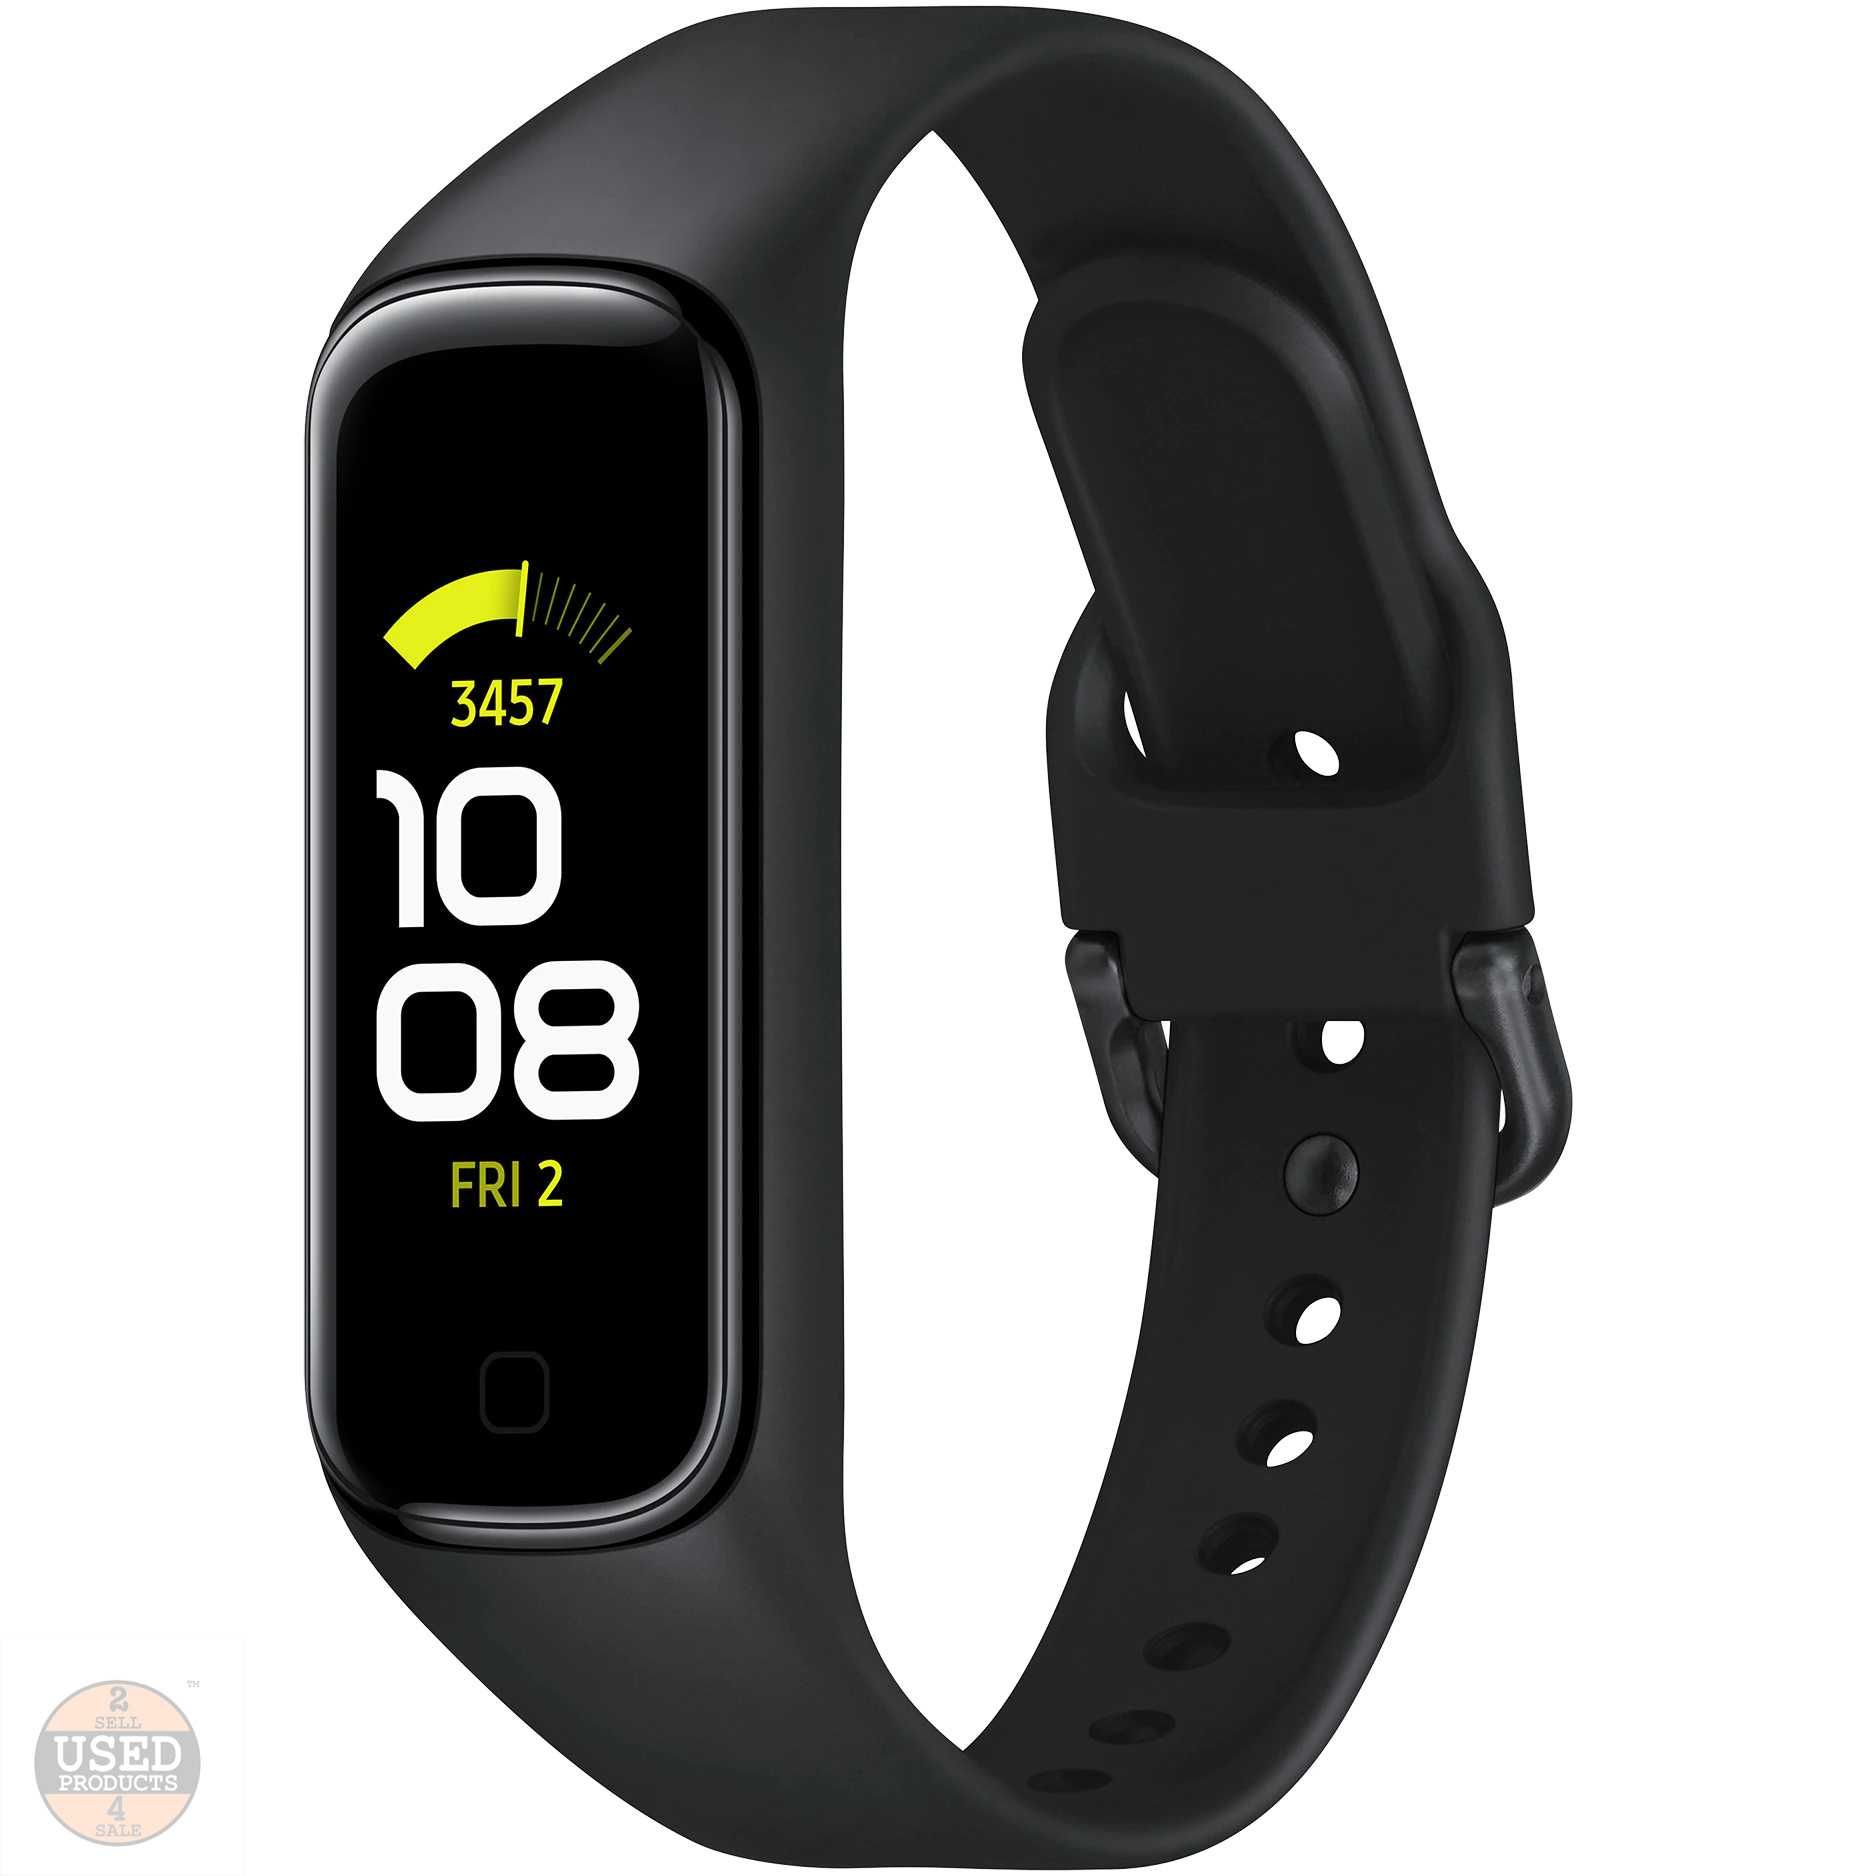 Depletion Eradicate Sequel Bratara Fitness Samsung Galaxy Fit 2, 1.1 inch, HR | UsedProducts.ro  Cluj-Napoca • OLX.ro